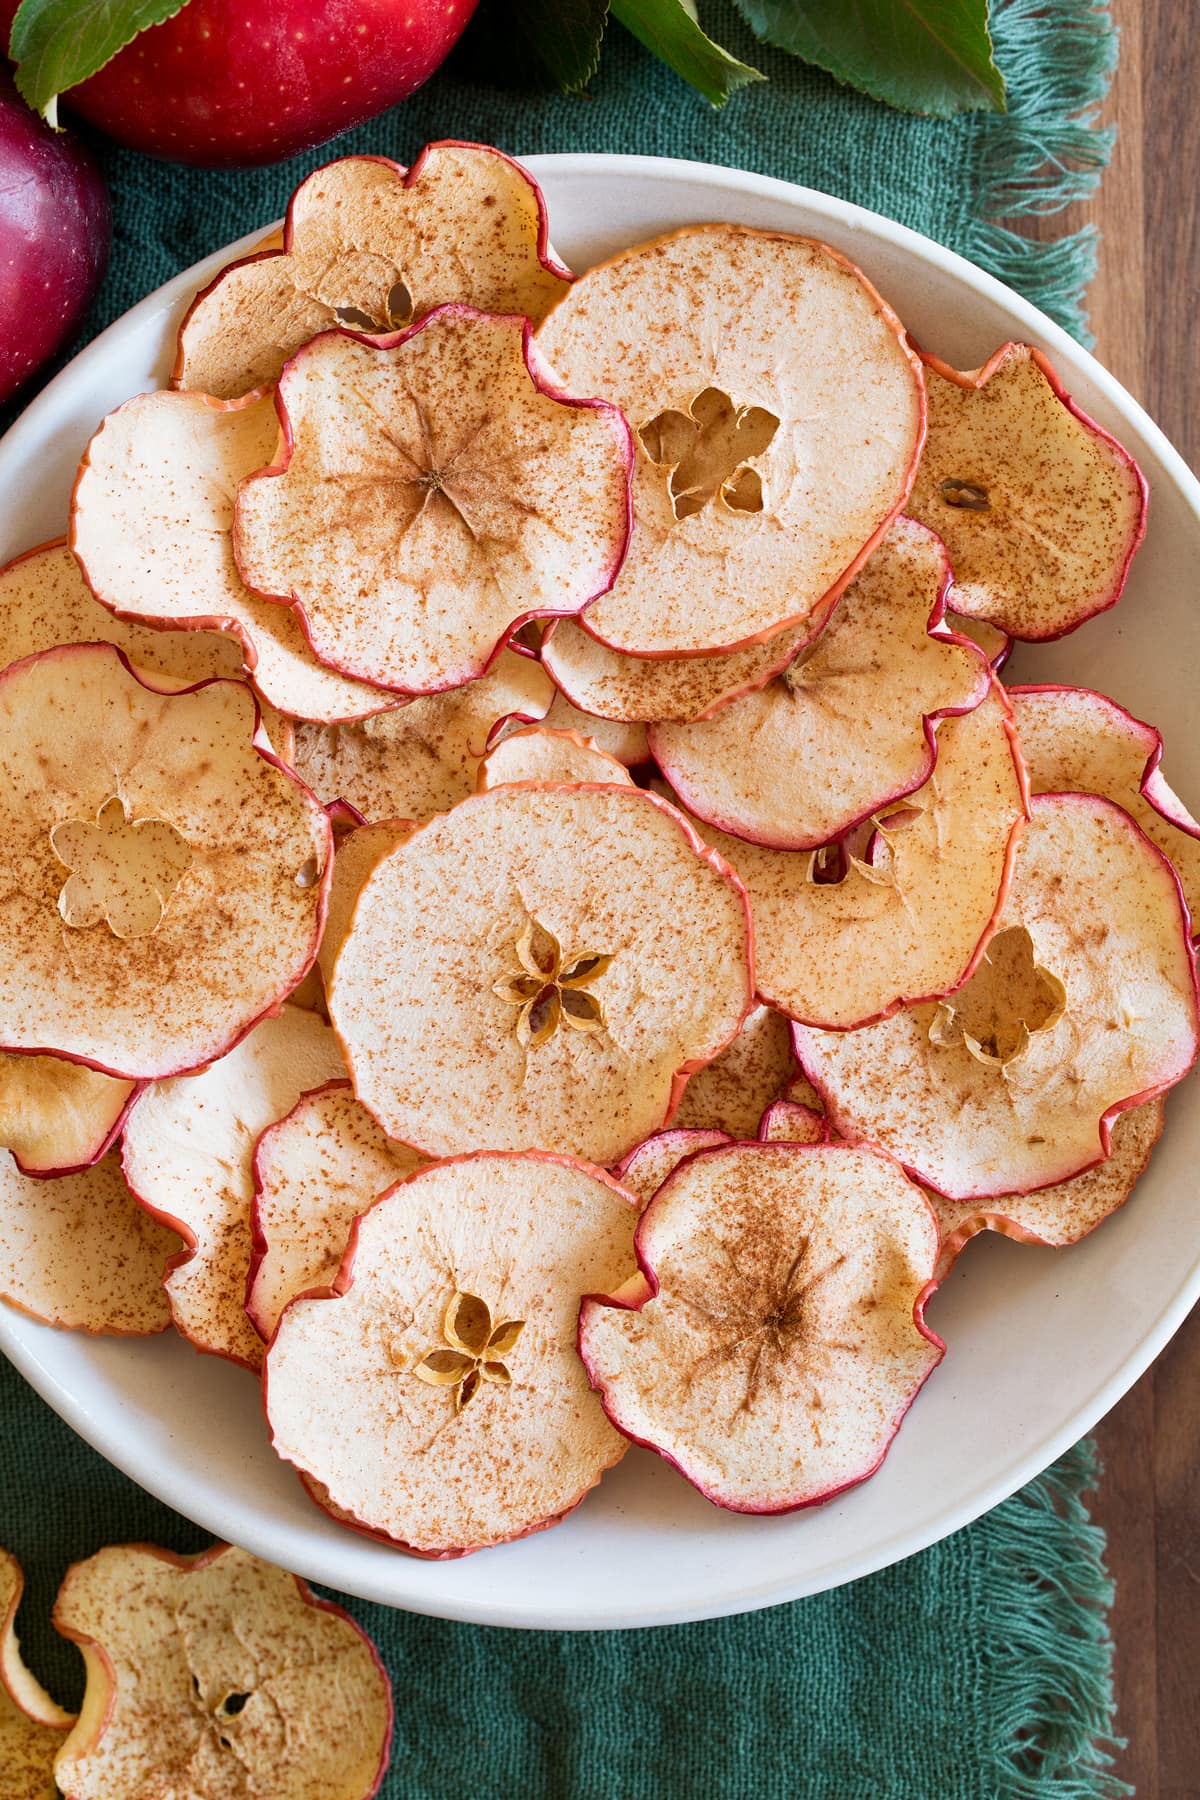 Overhead view of homemade baked apple chips in a white bowl.